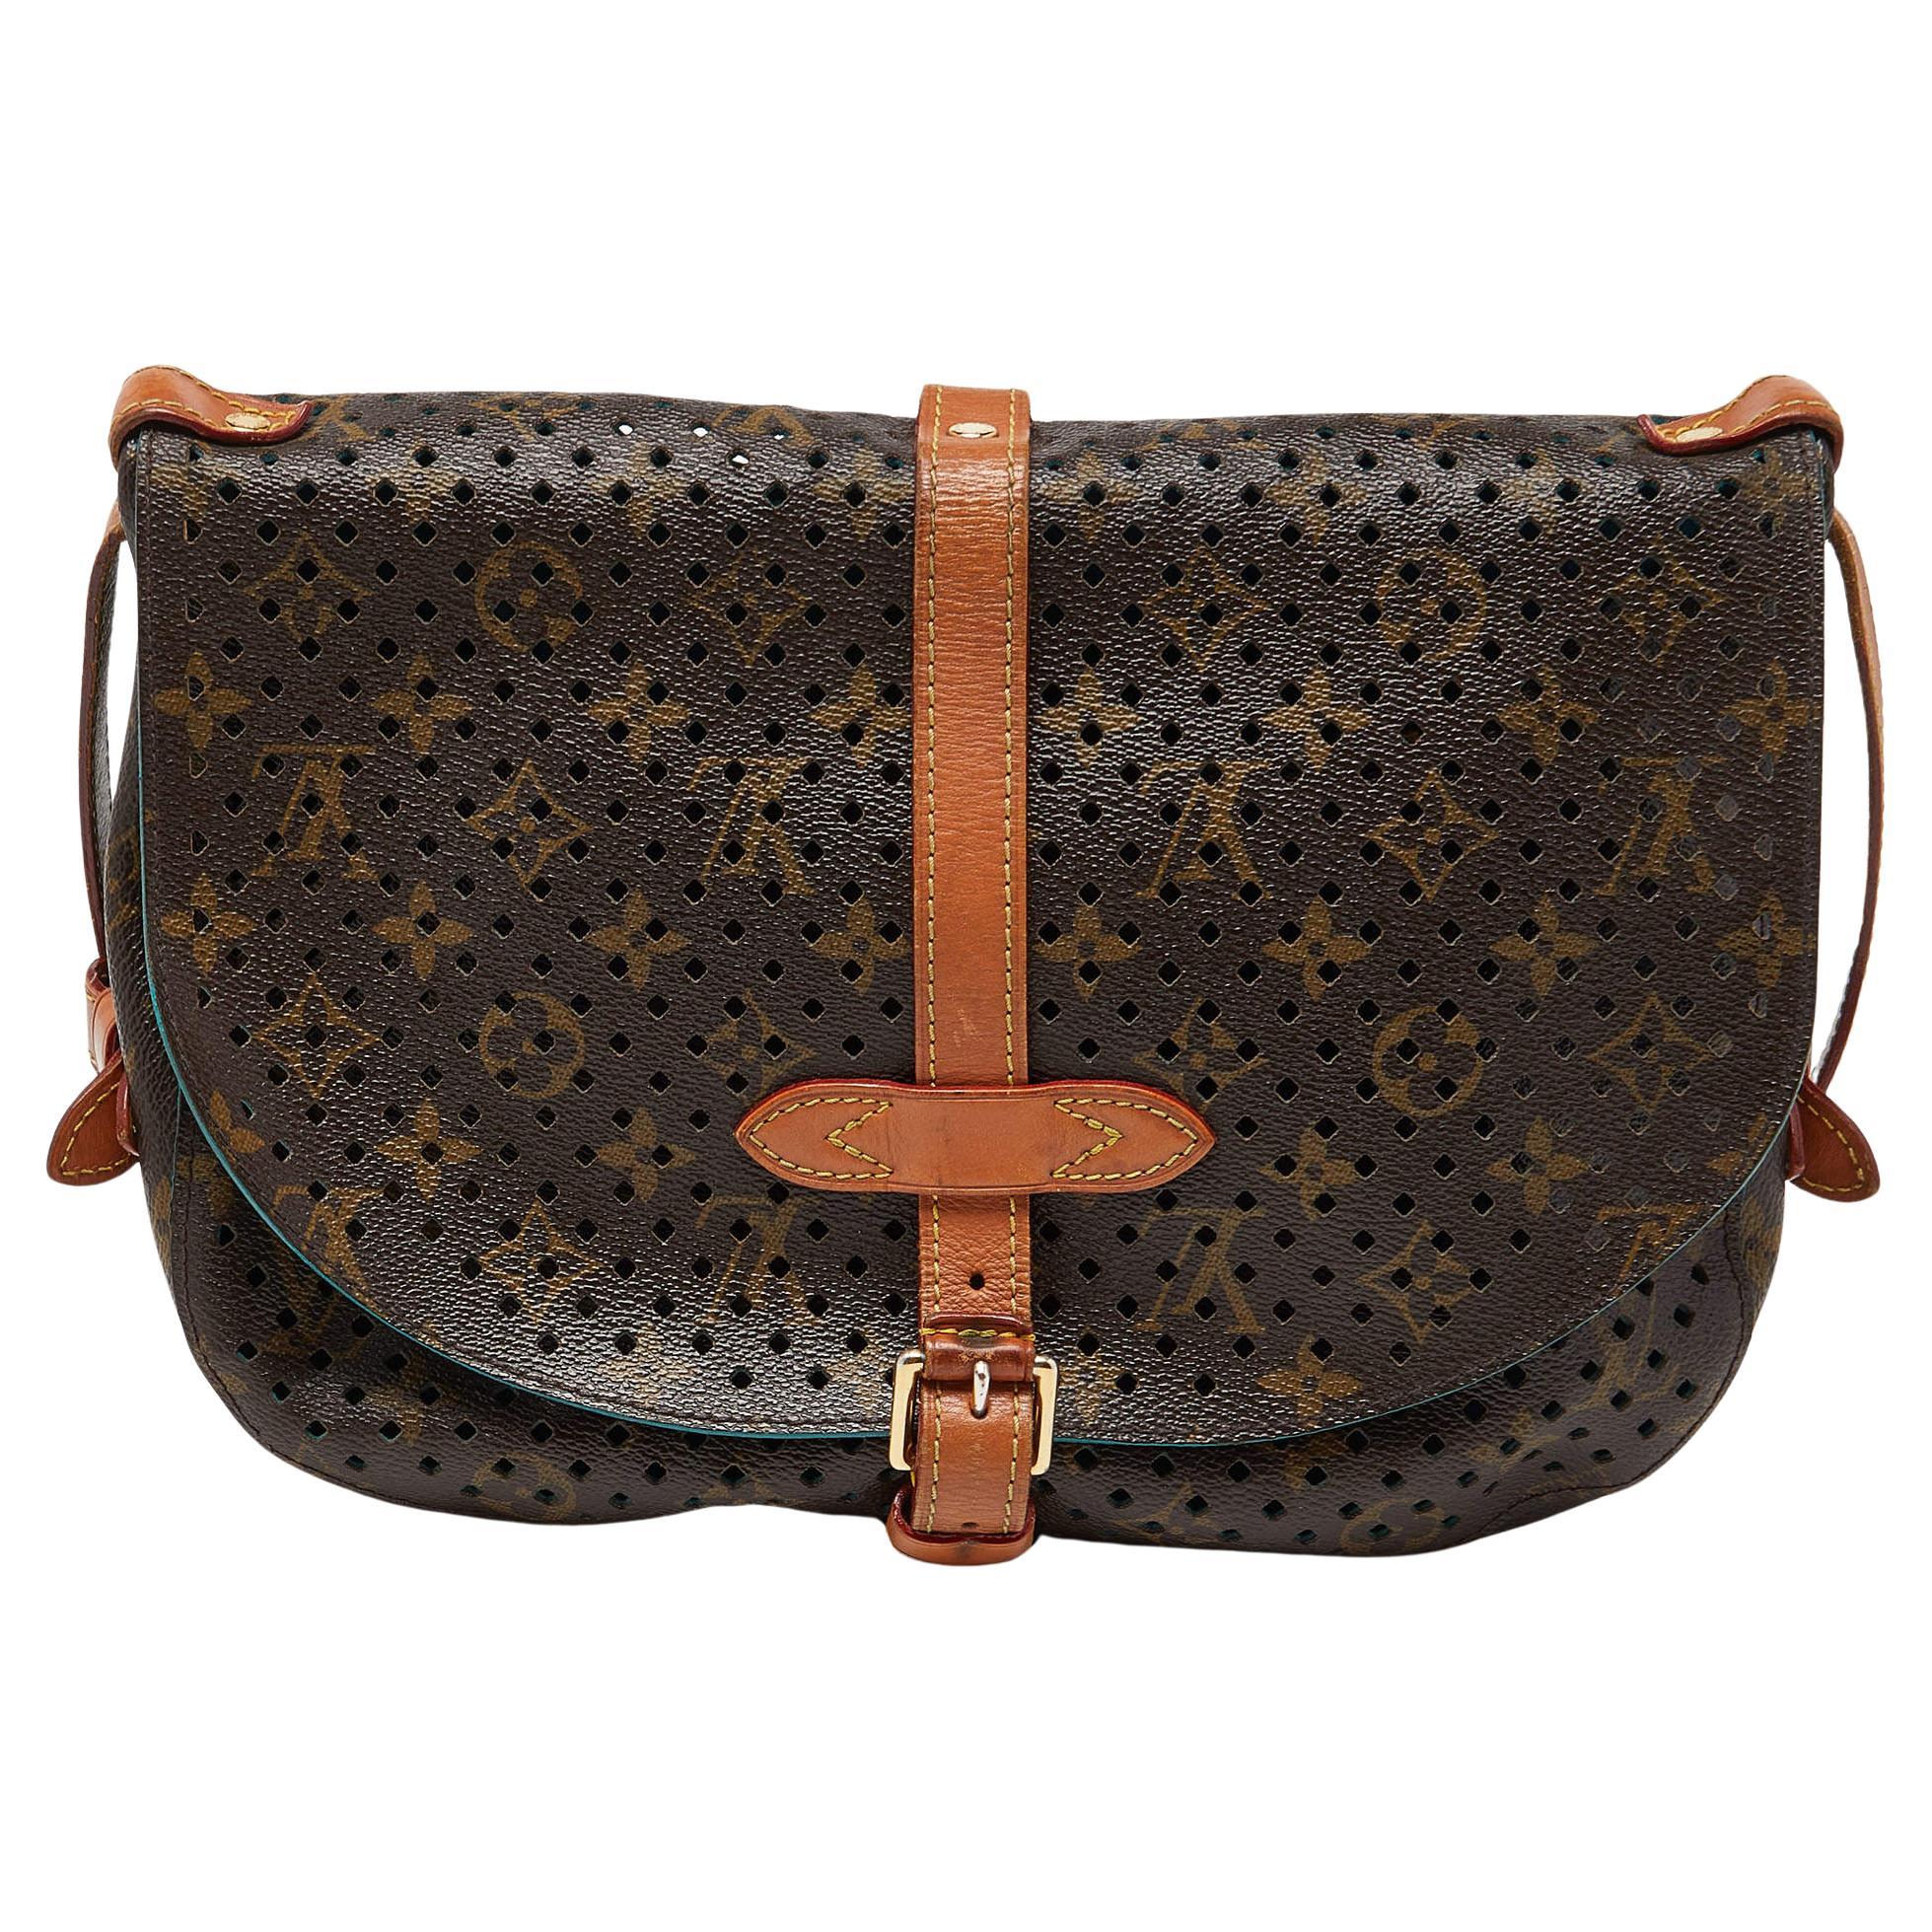 Louis Vuitton Perforated Monogram Canvas and Leather Saumur 30 Bag